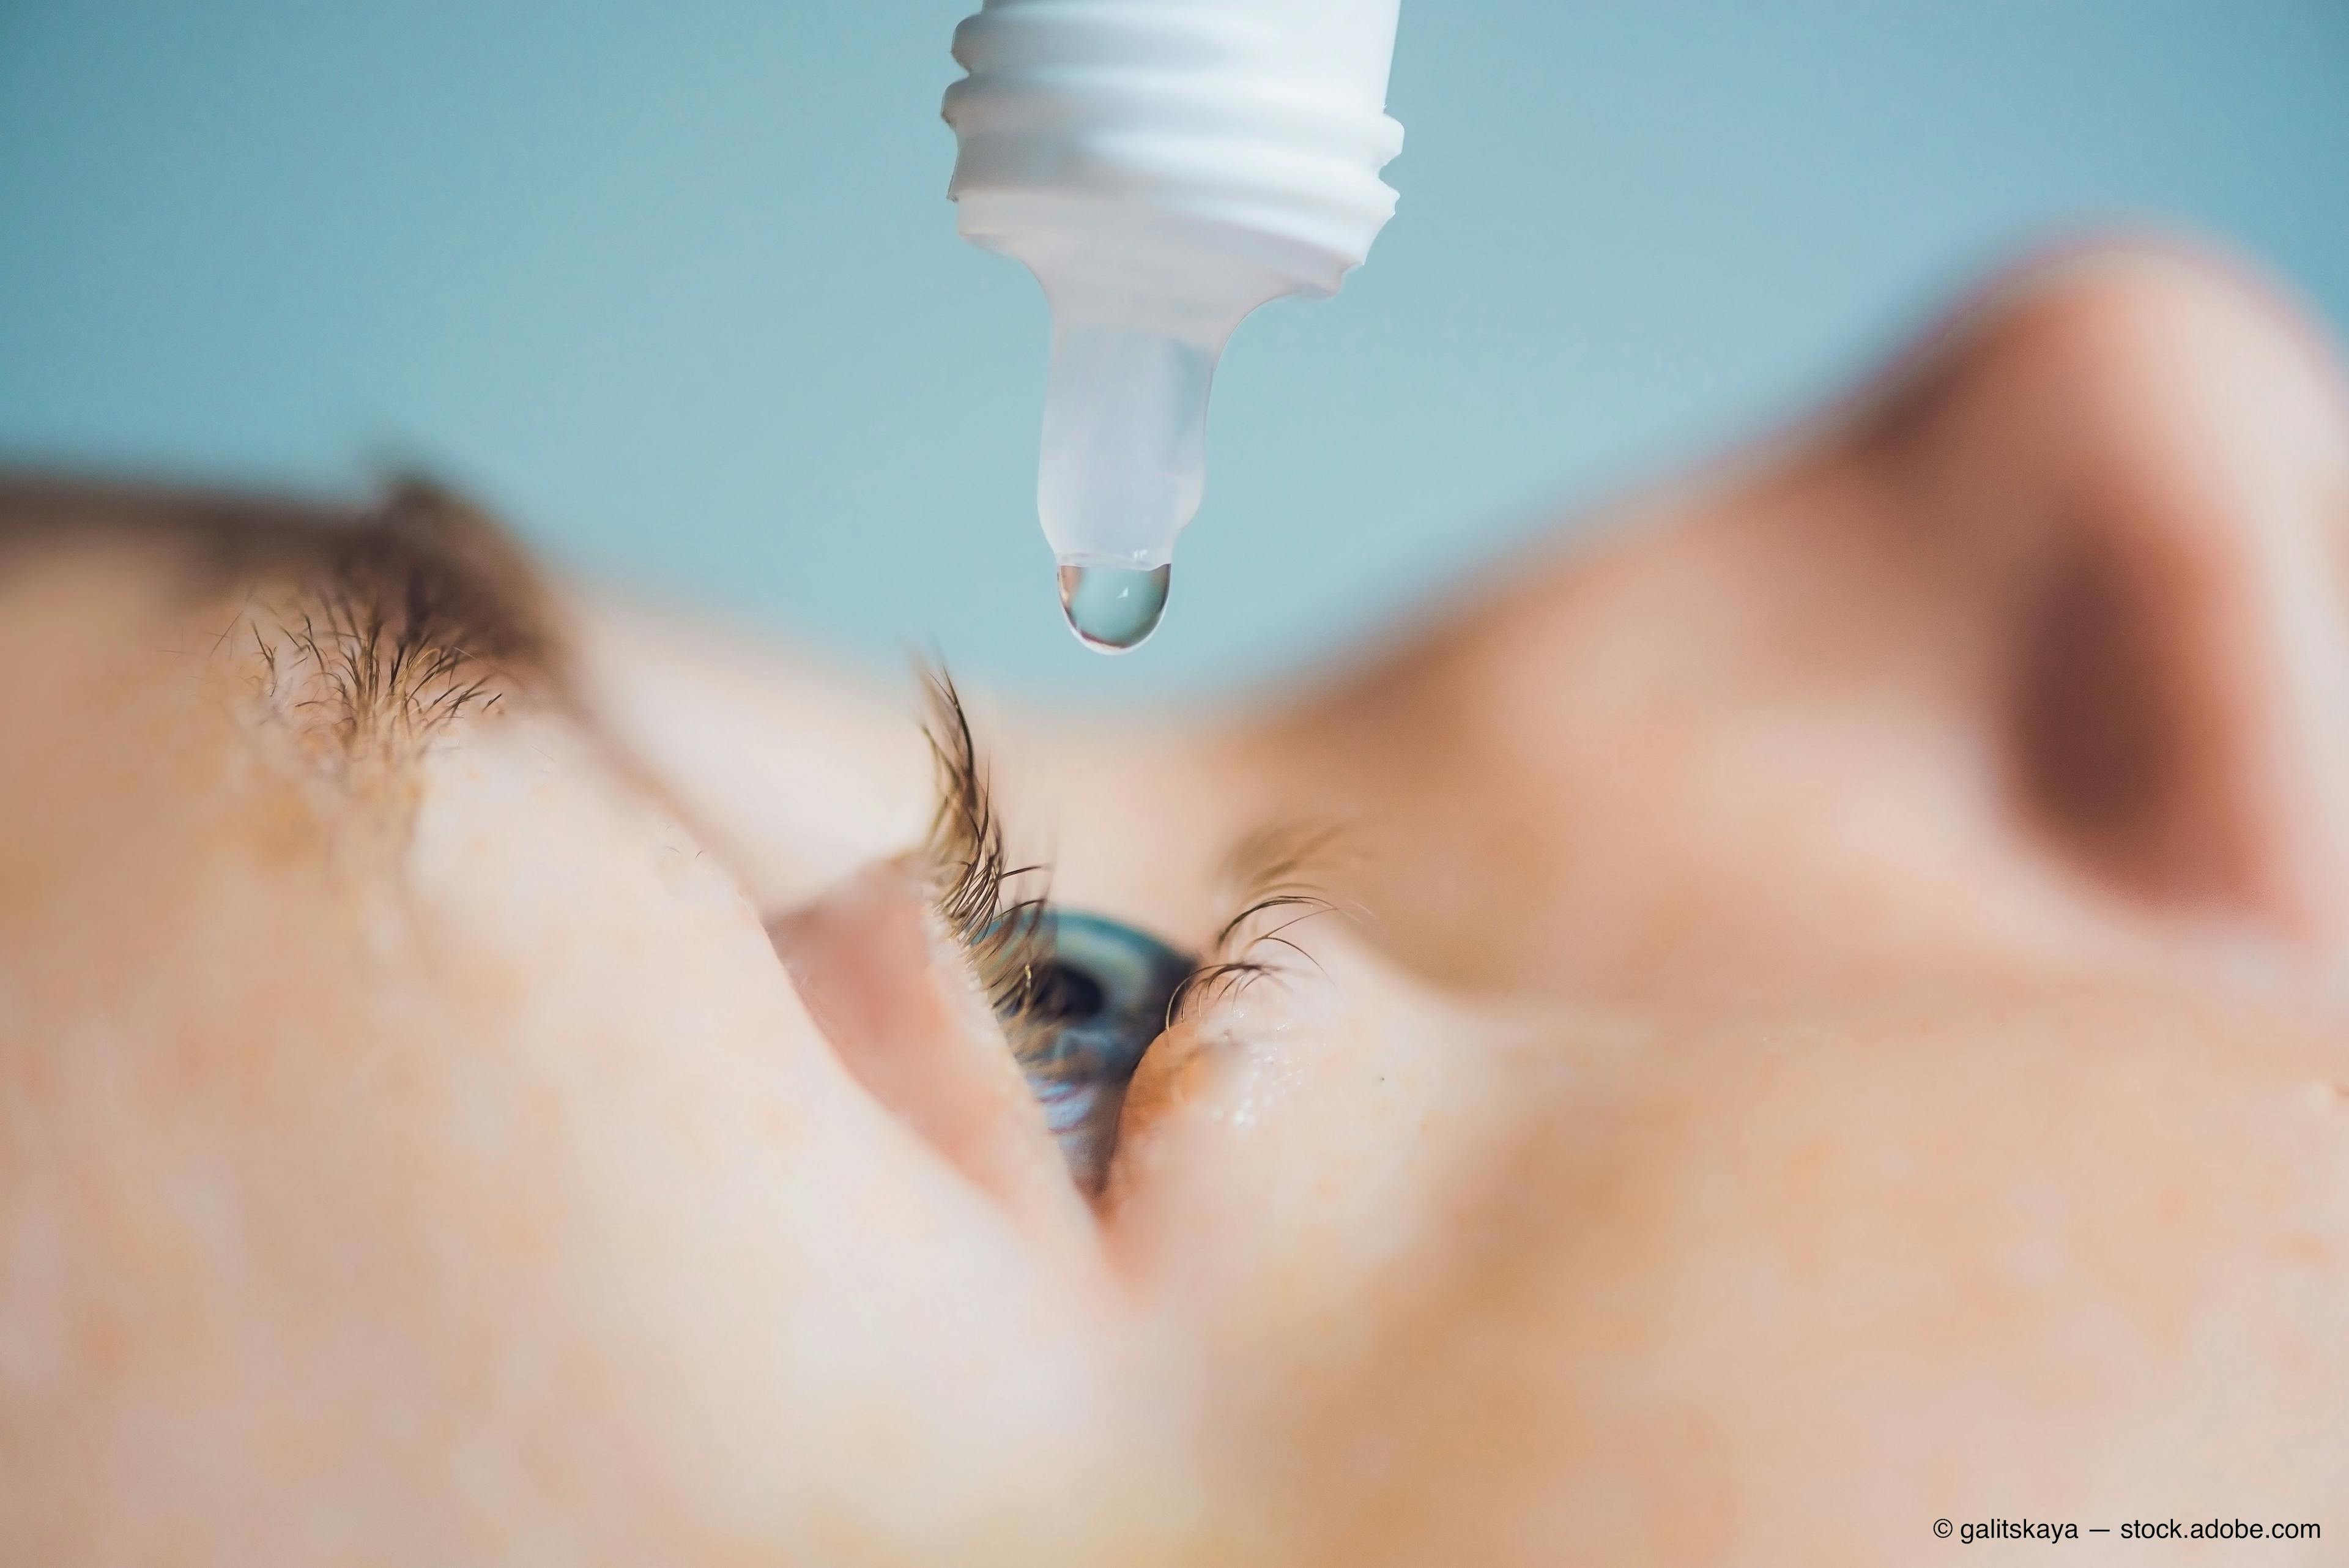 Company files international patent application for dry eye disease treatment